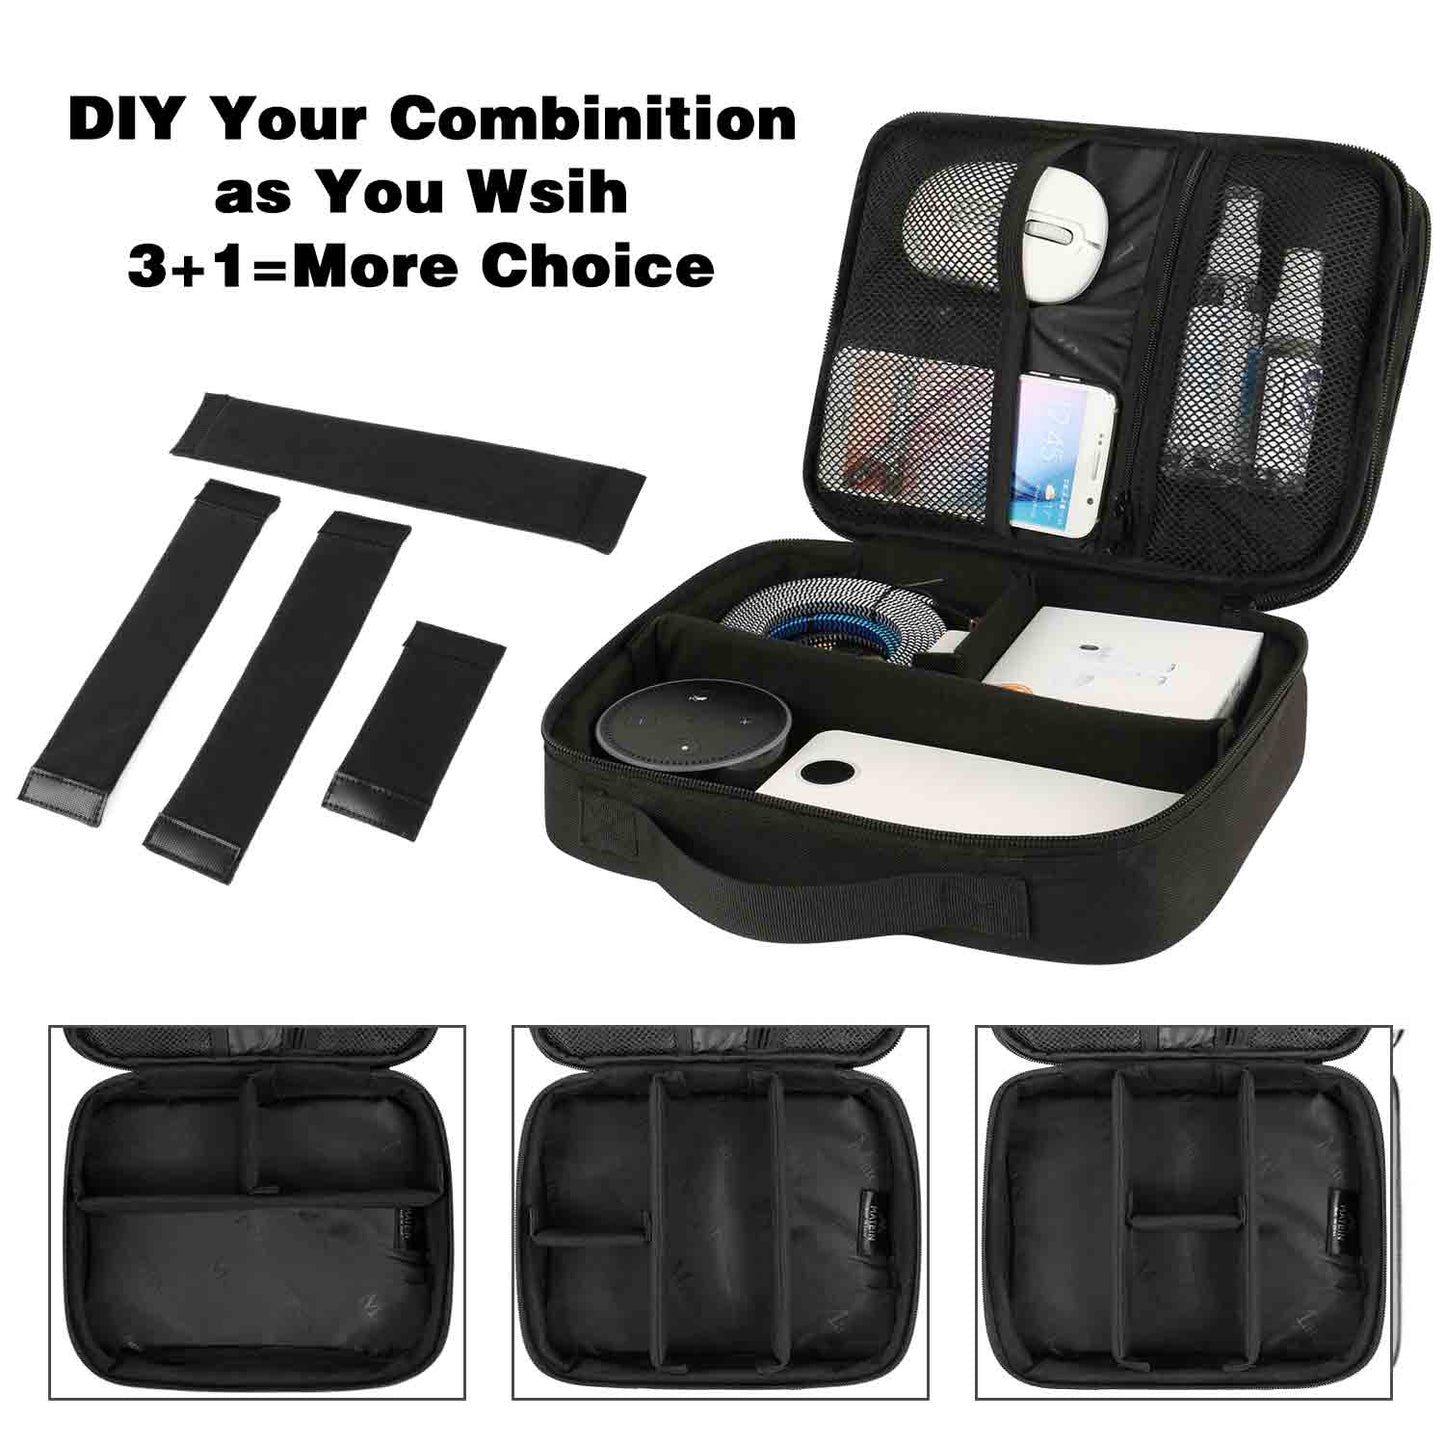 MATEIN Clear Electronics Organizer, Travel Cable Organizer Bag with Handle  Double Layer Cord Organiz…See more MATEIN Clear Electronics Organizer